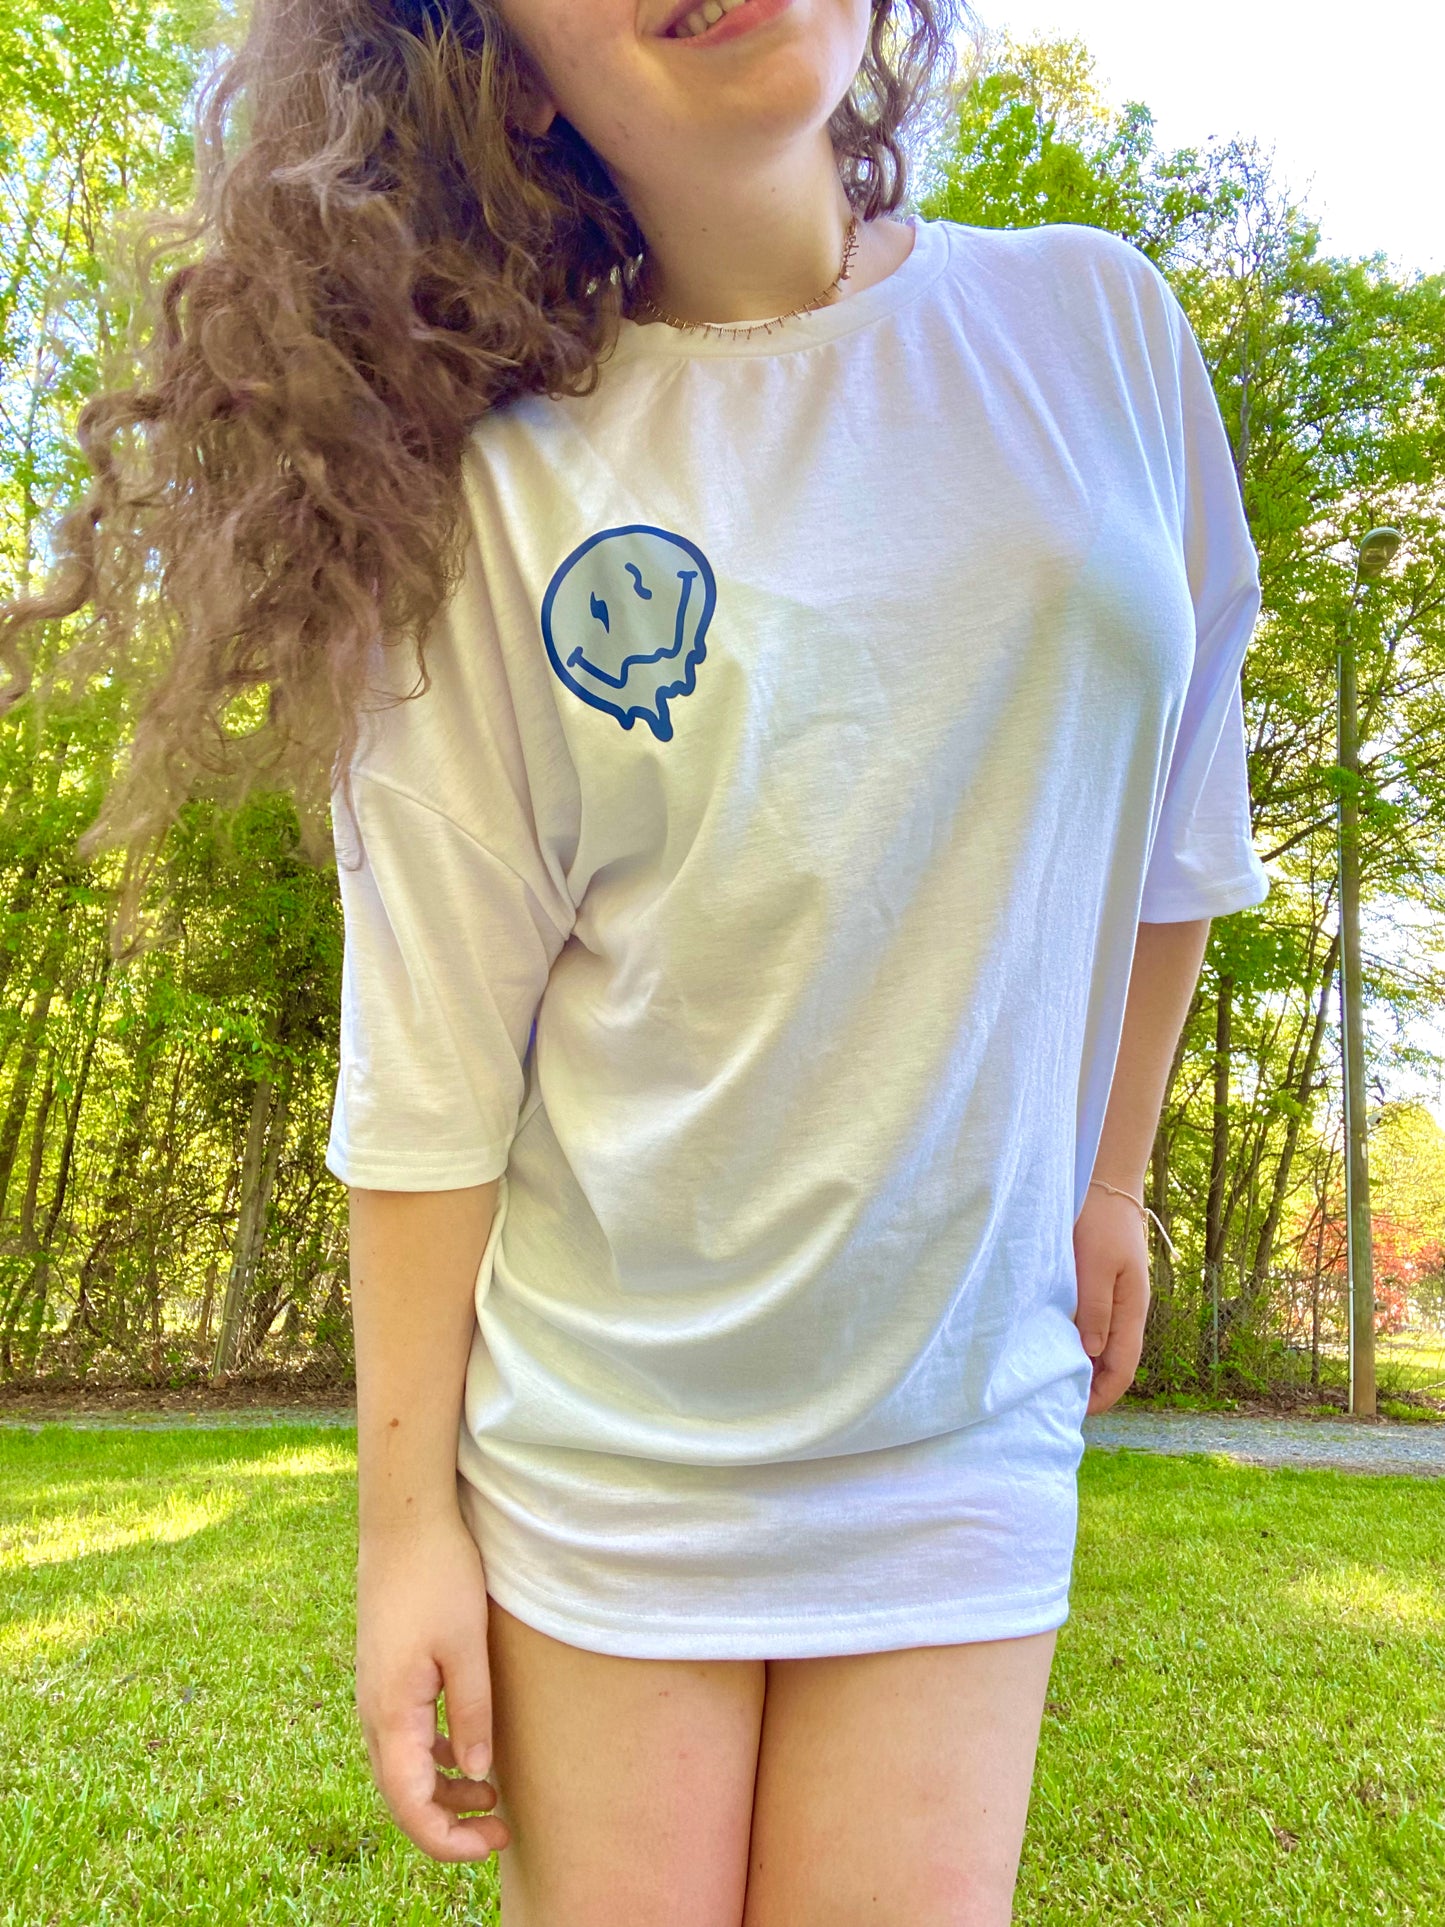 Enjoy The Little Things Preppy Aesthetic Smiley Face Graphic Tee